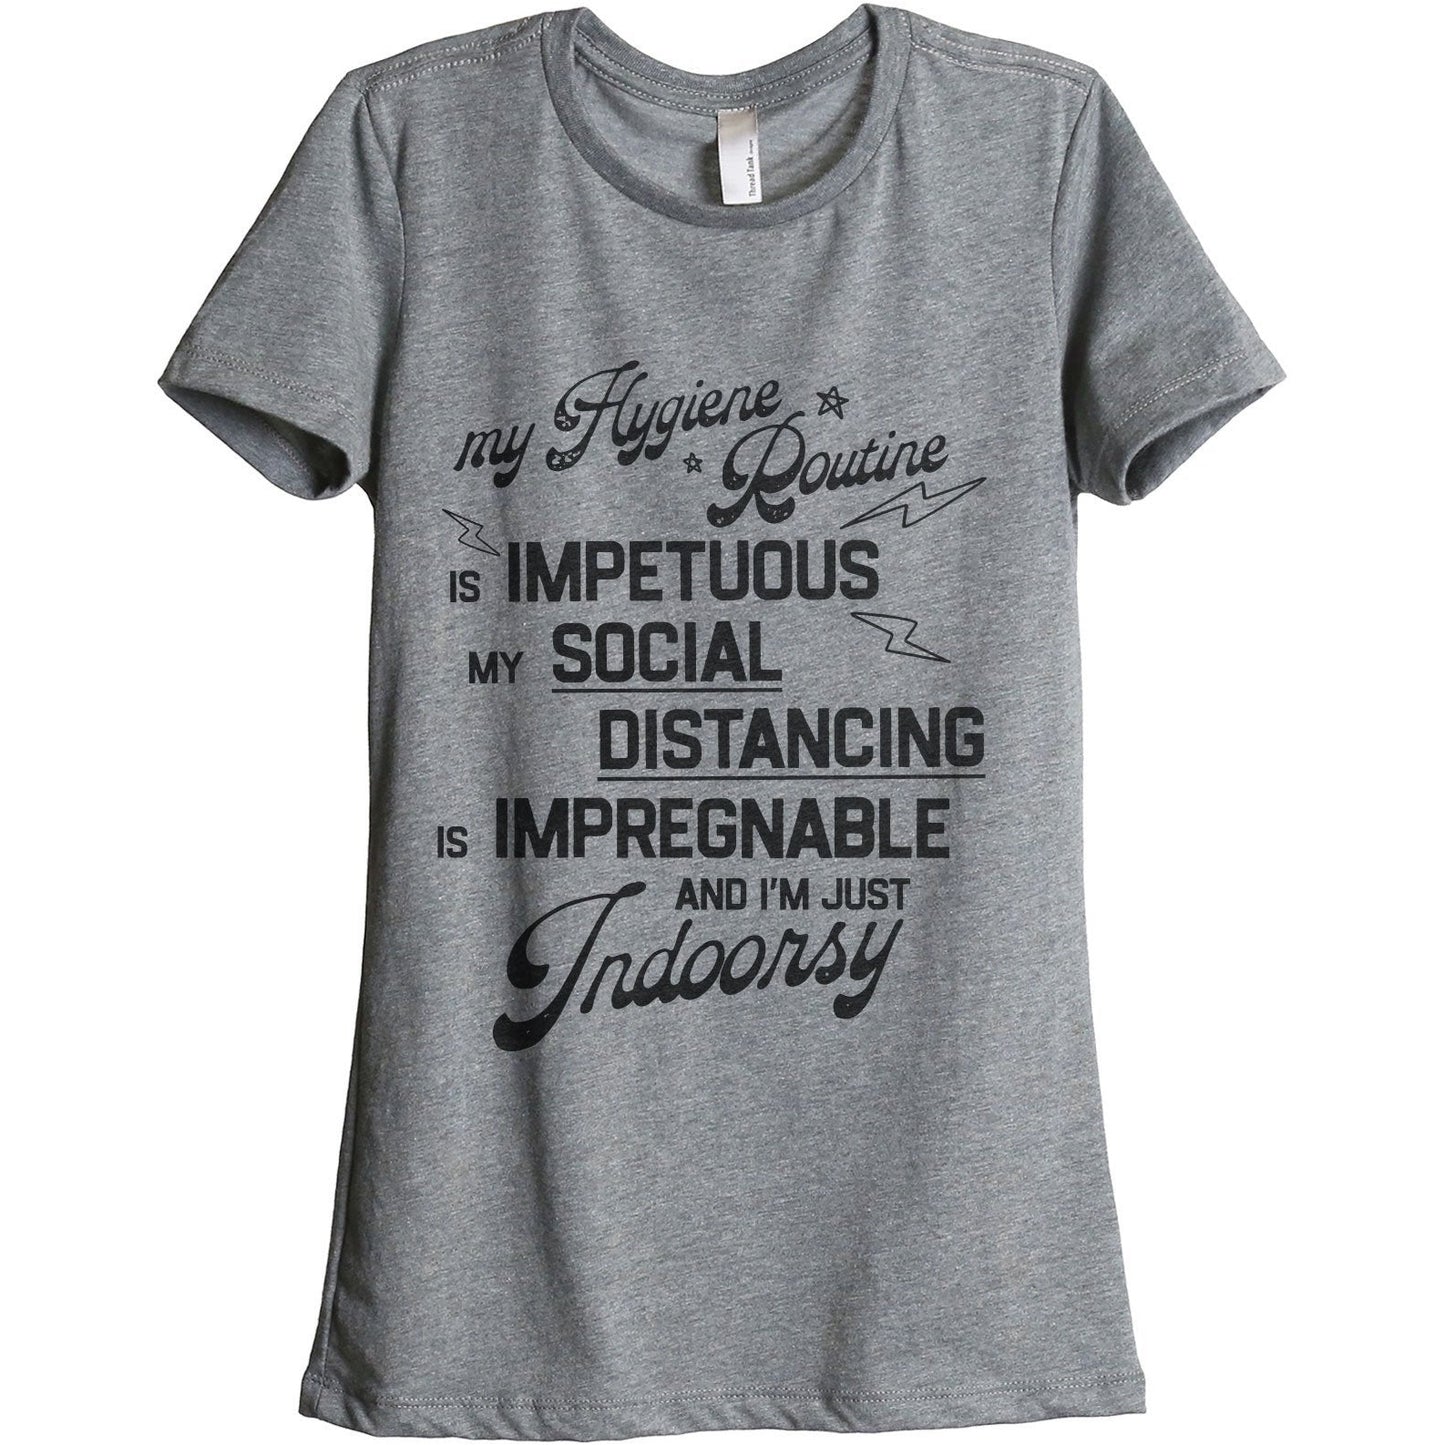 Hygiene Routine Impetuous Women's Relaxed Crewneck T-Shirt Top Tee Heather Grey